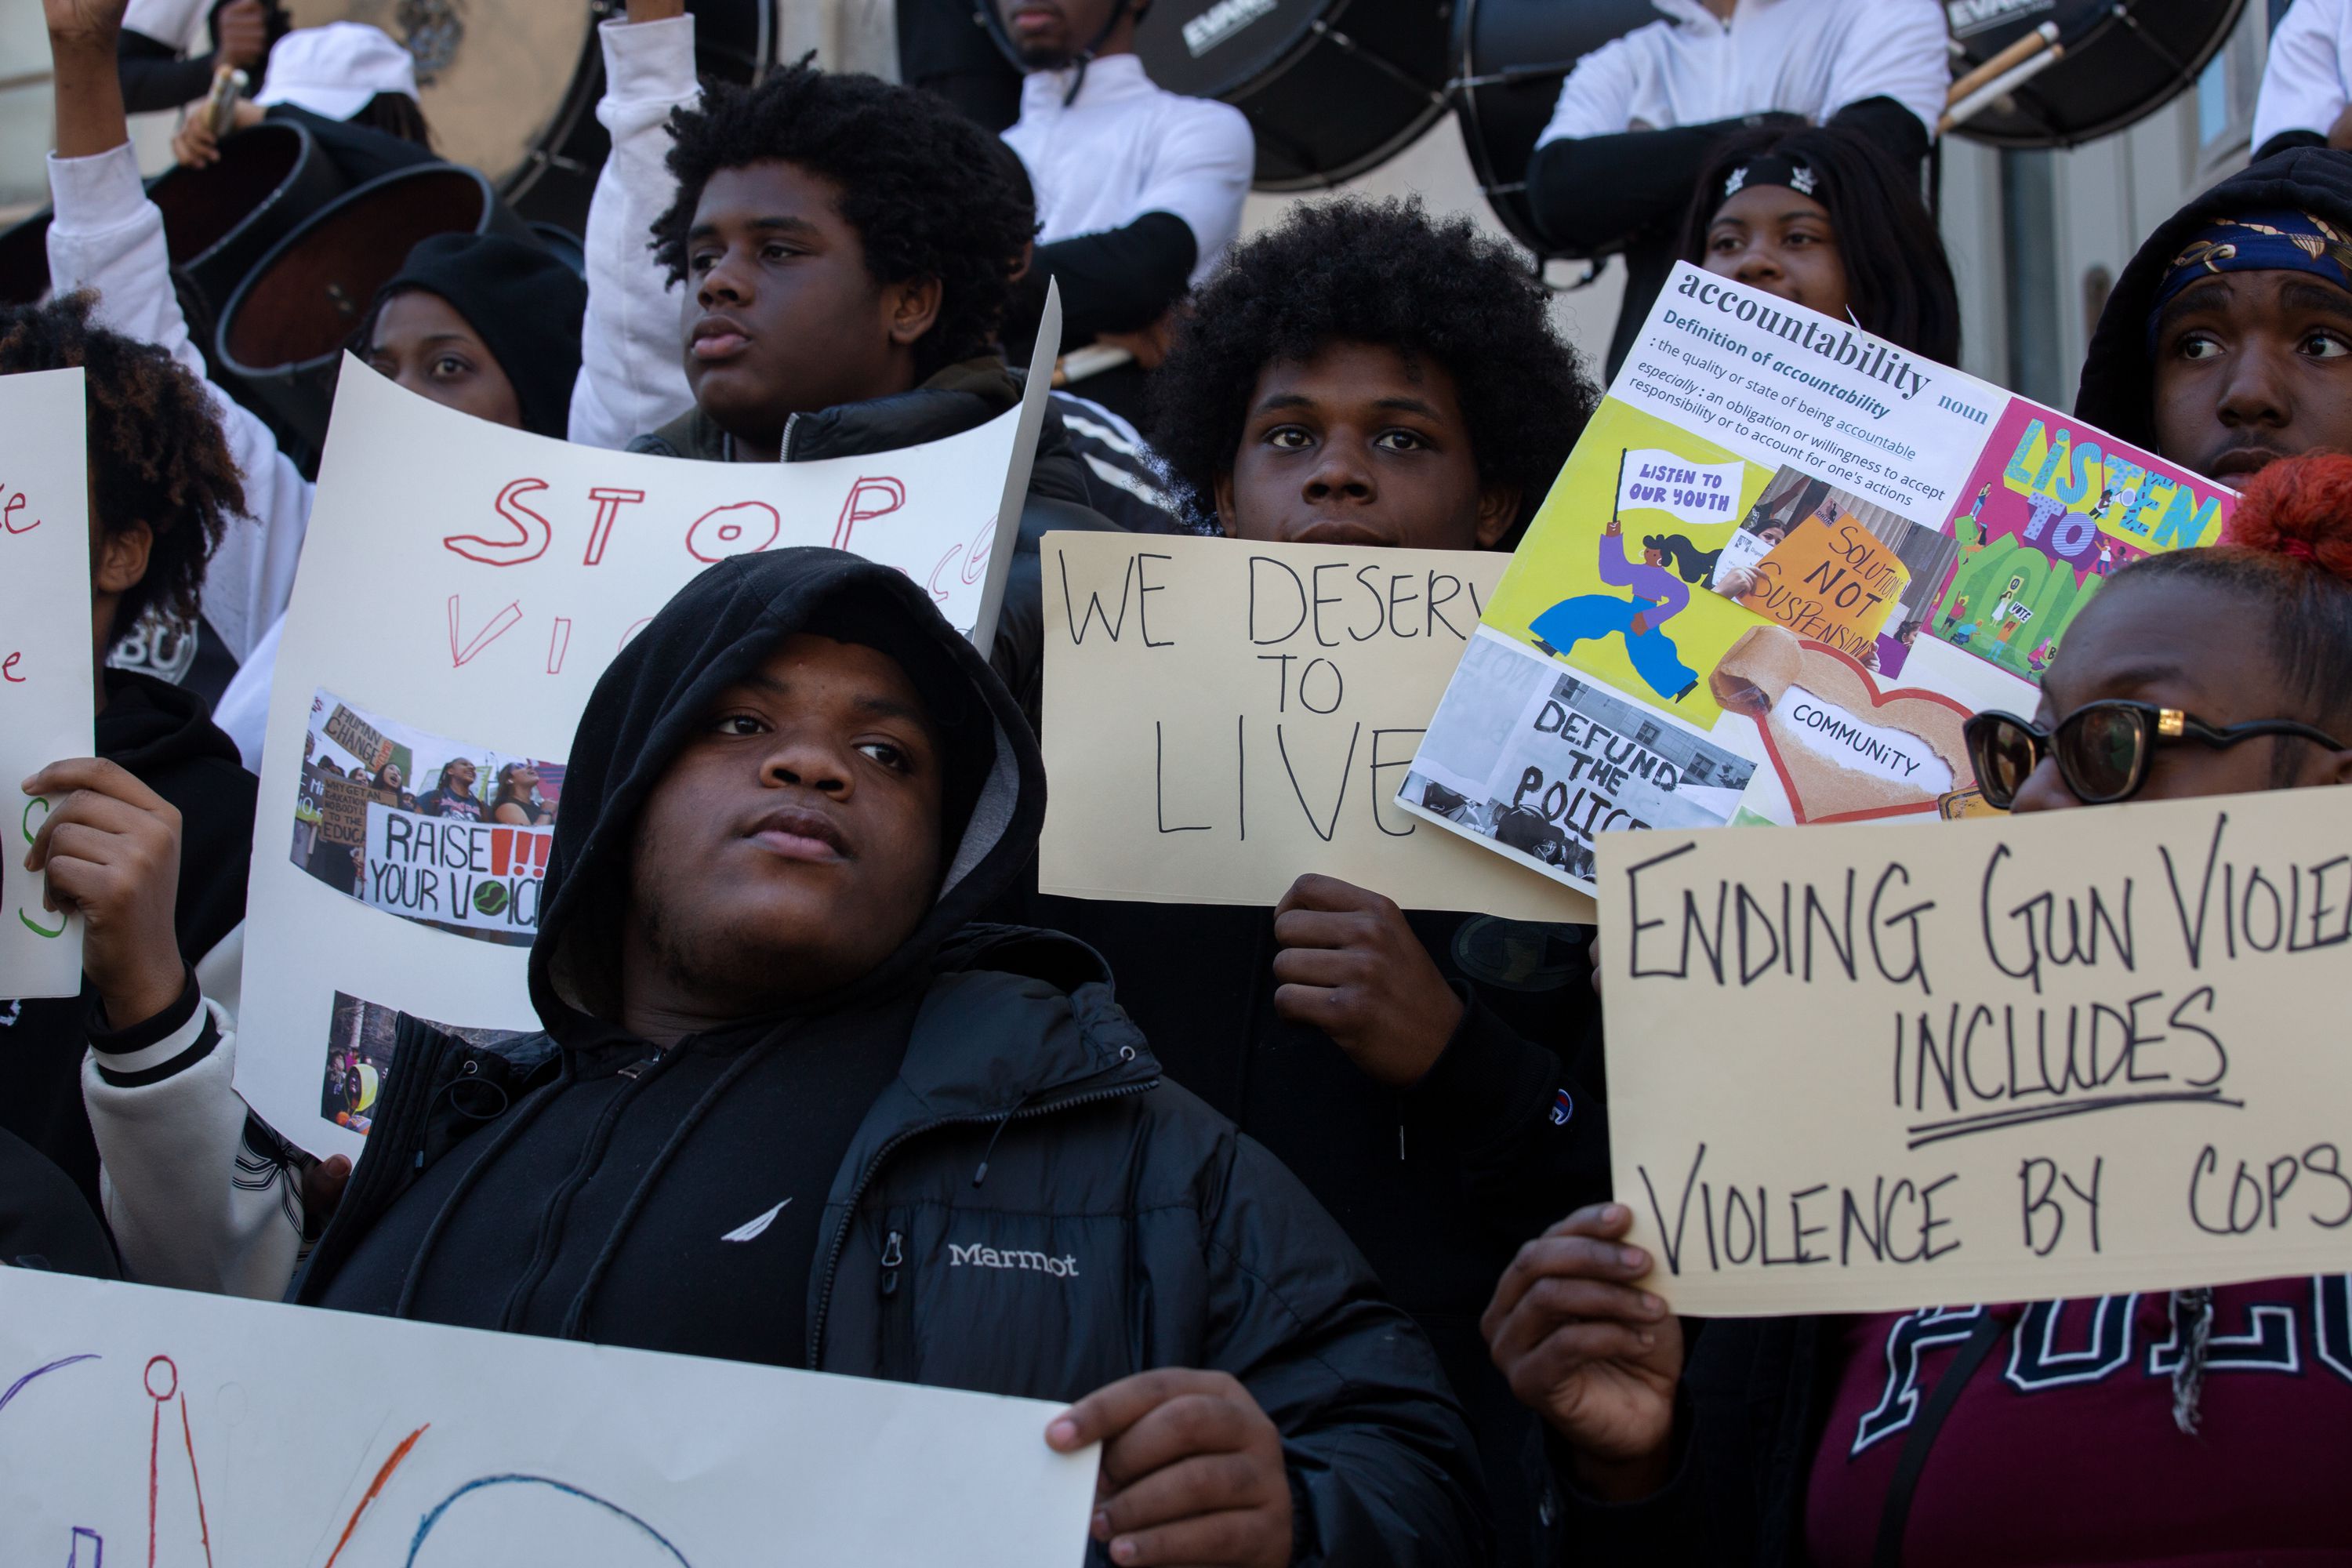 Brownsville teens Kyi-el, Brendan and Kawun rally at Brooklyn Borough with community members, demanding accountability for retired NYPD officer Kruythoff Forrester chasing them with a gun.